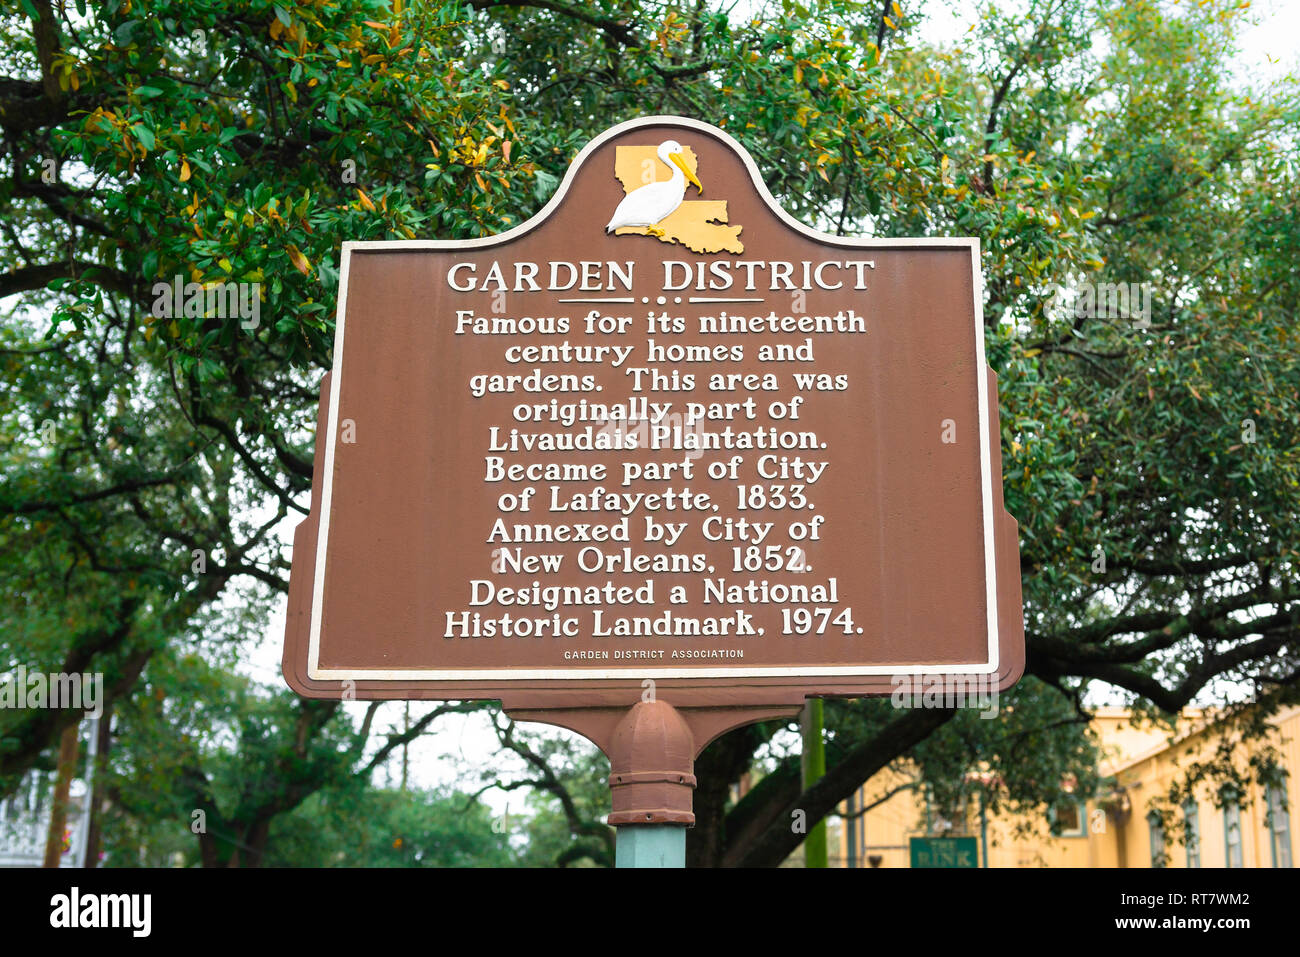 Garden District New Orleans, view of a sign in the Garden District of New Orleans giving information about the origins and history of the area, USA Stock Photo